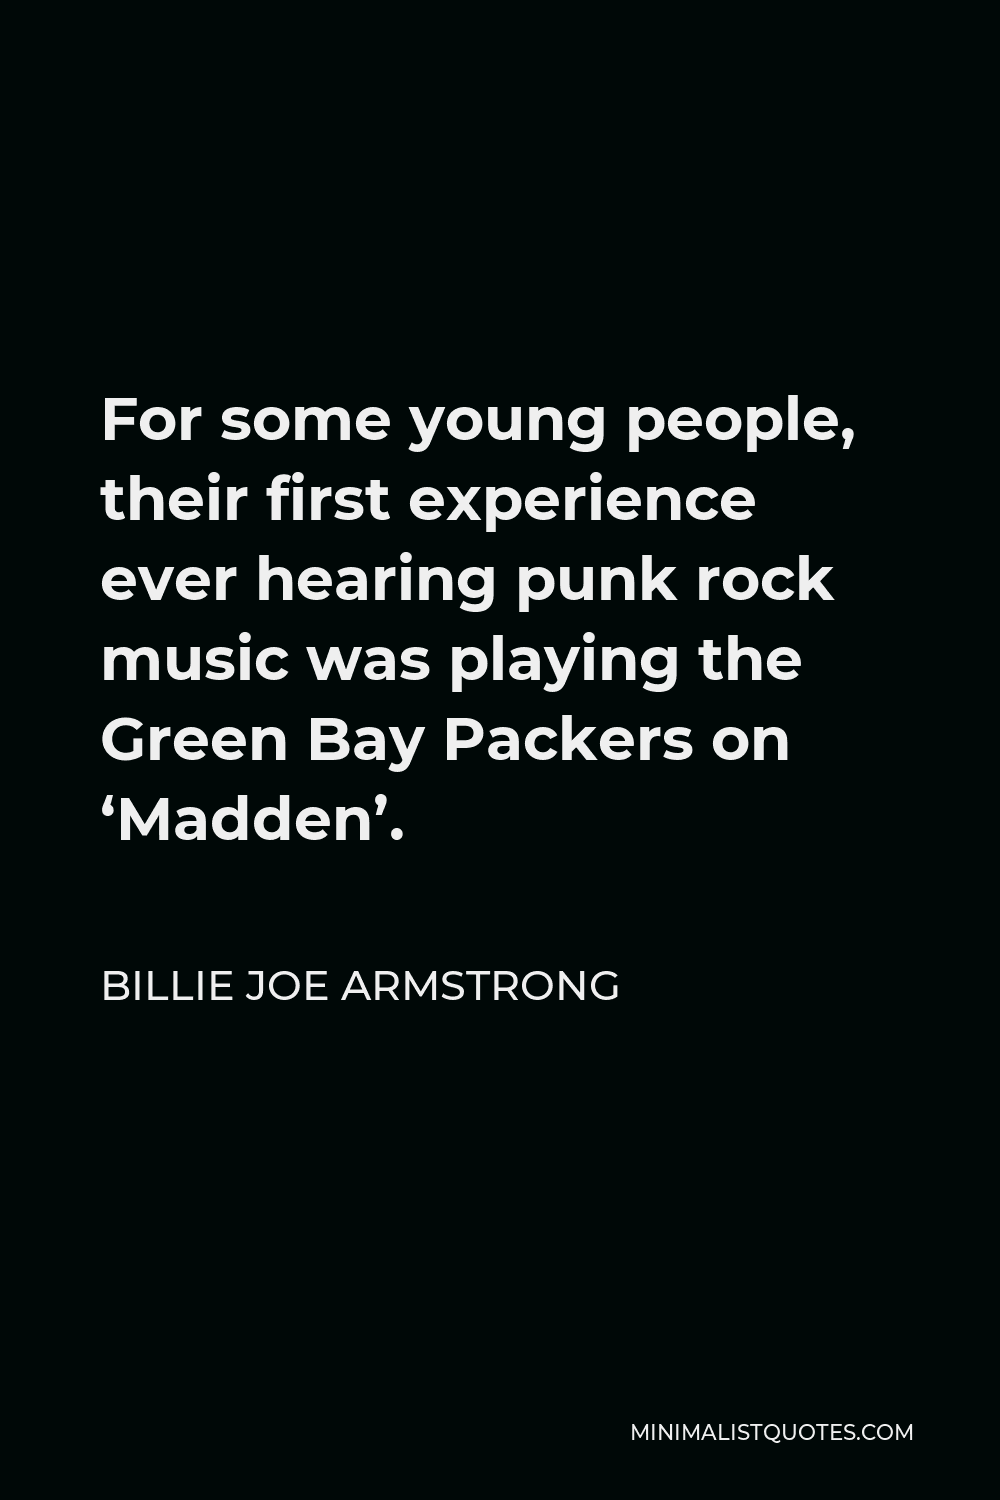 Billie Joe Armstrong Quote - For some young people, their first experience ever hearing punk rock music was playing the Green Bay Packers on ‘Madden’.